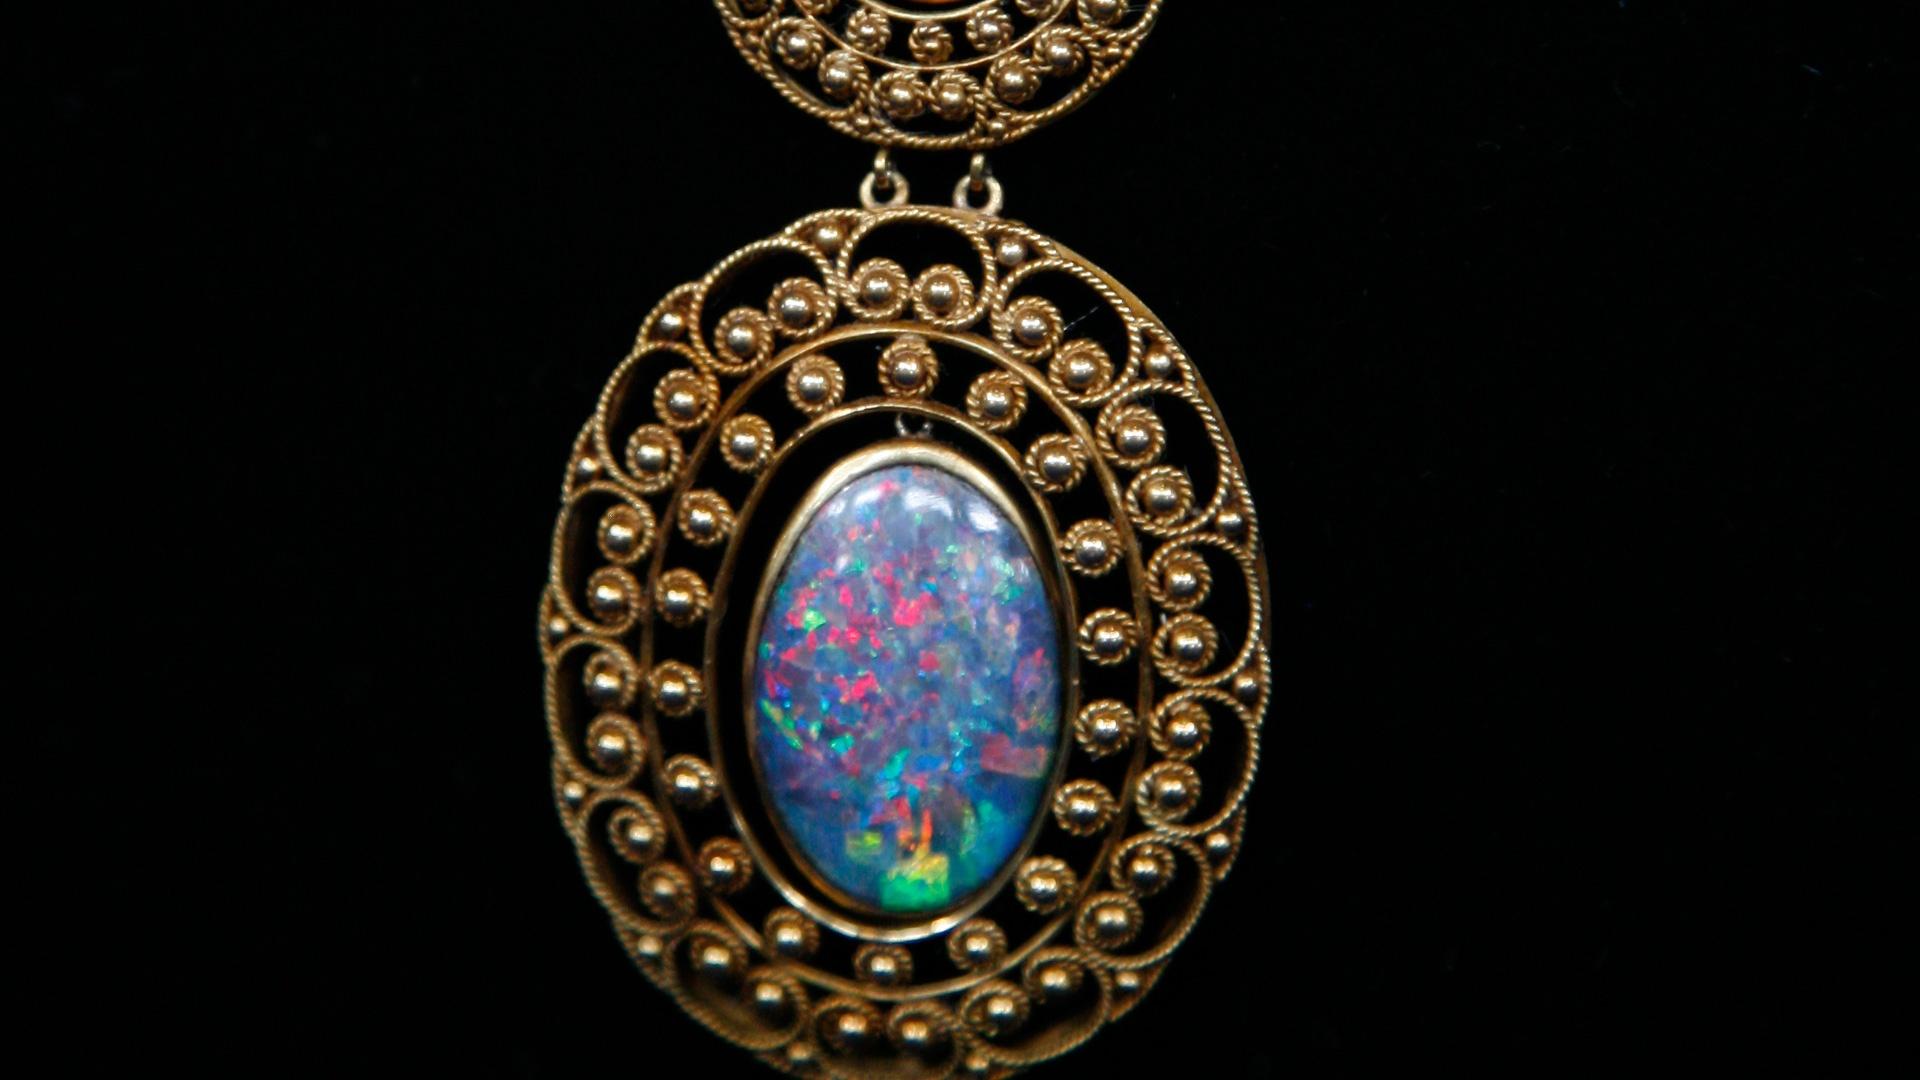 Art Nouveau necklace by Louis Comfort Tiffany of Tiffany & Co.